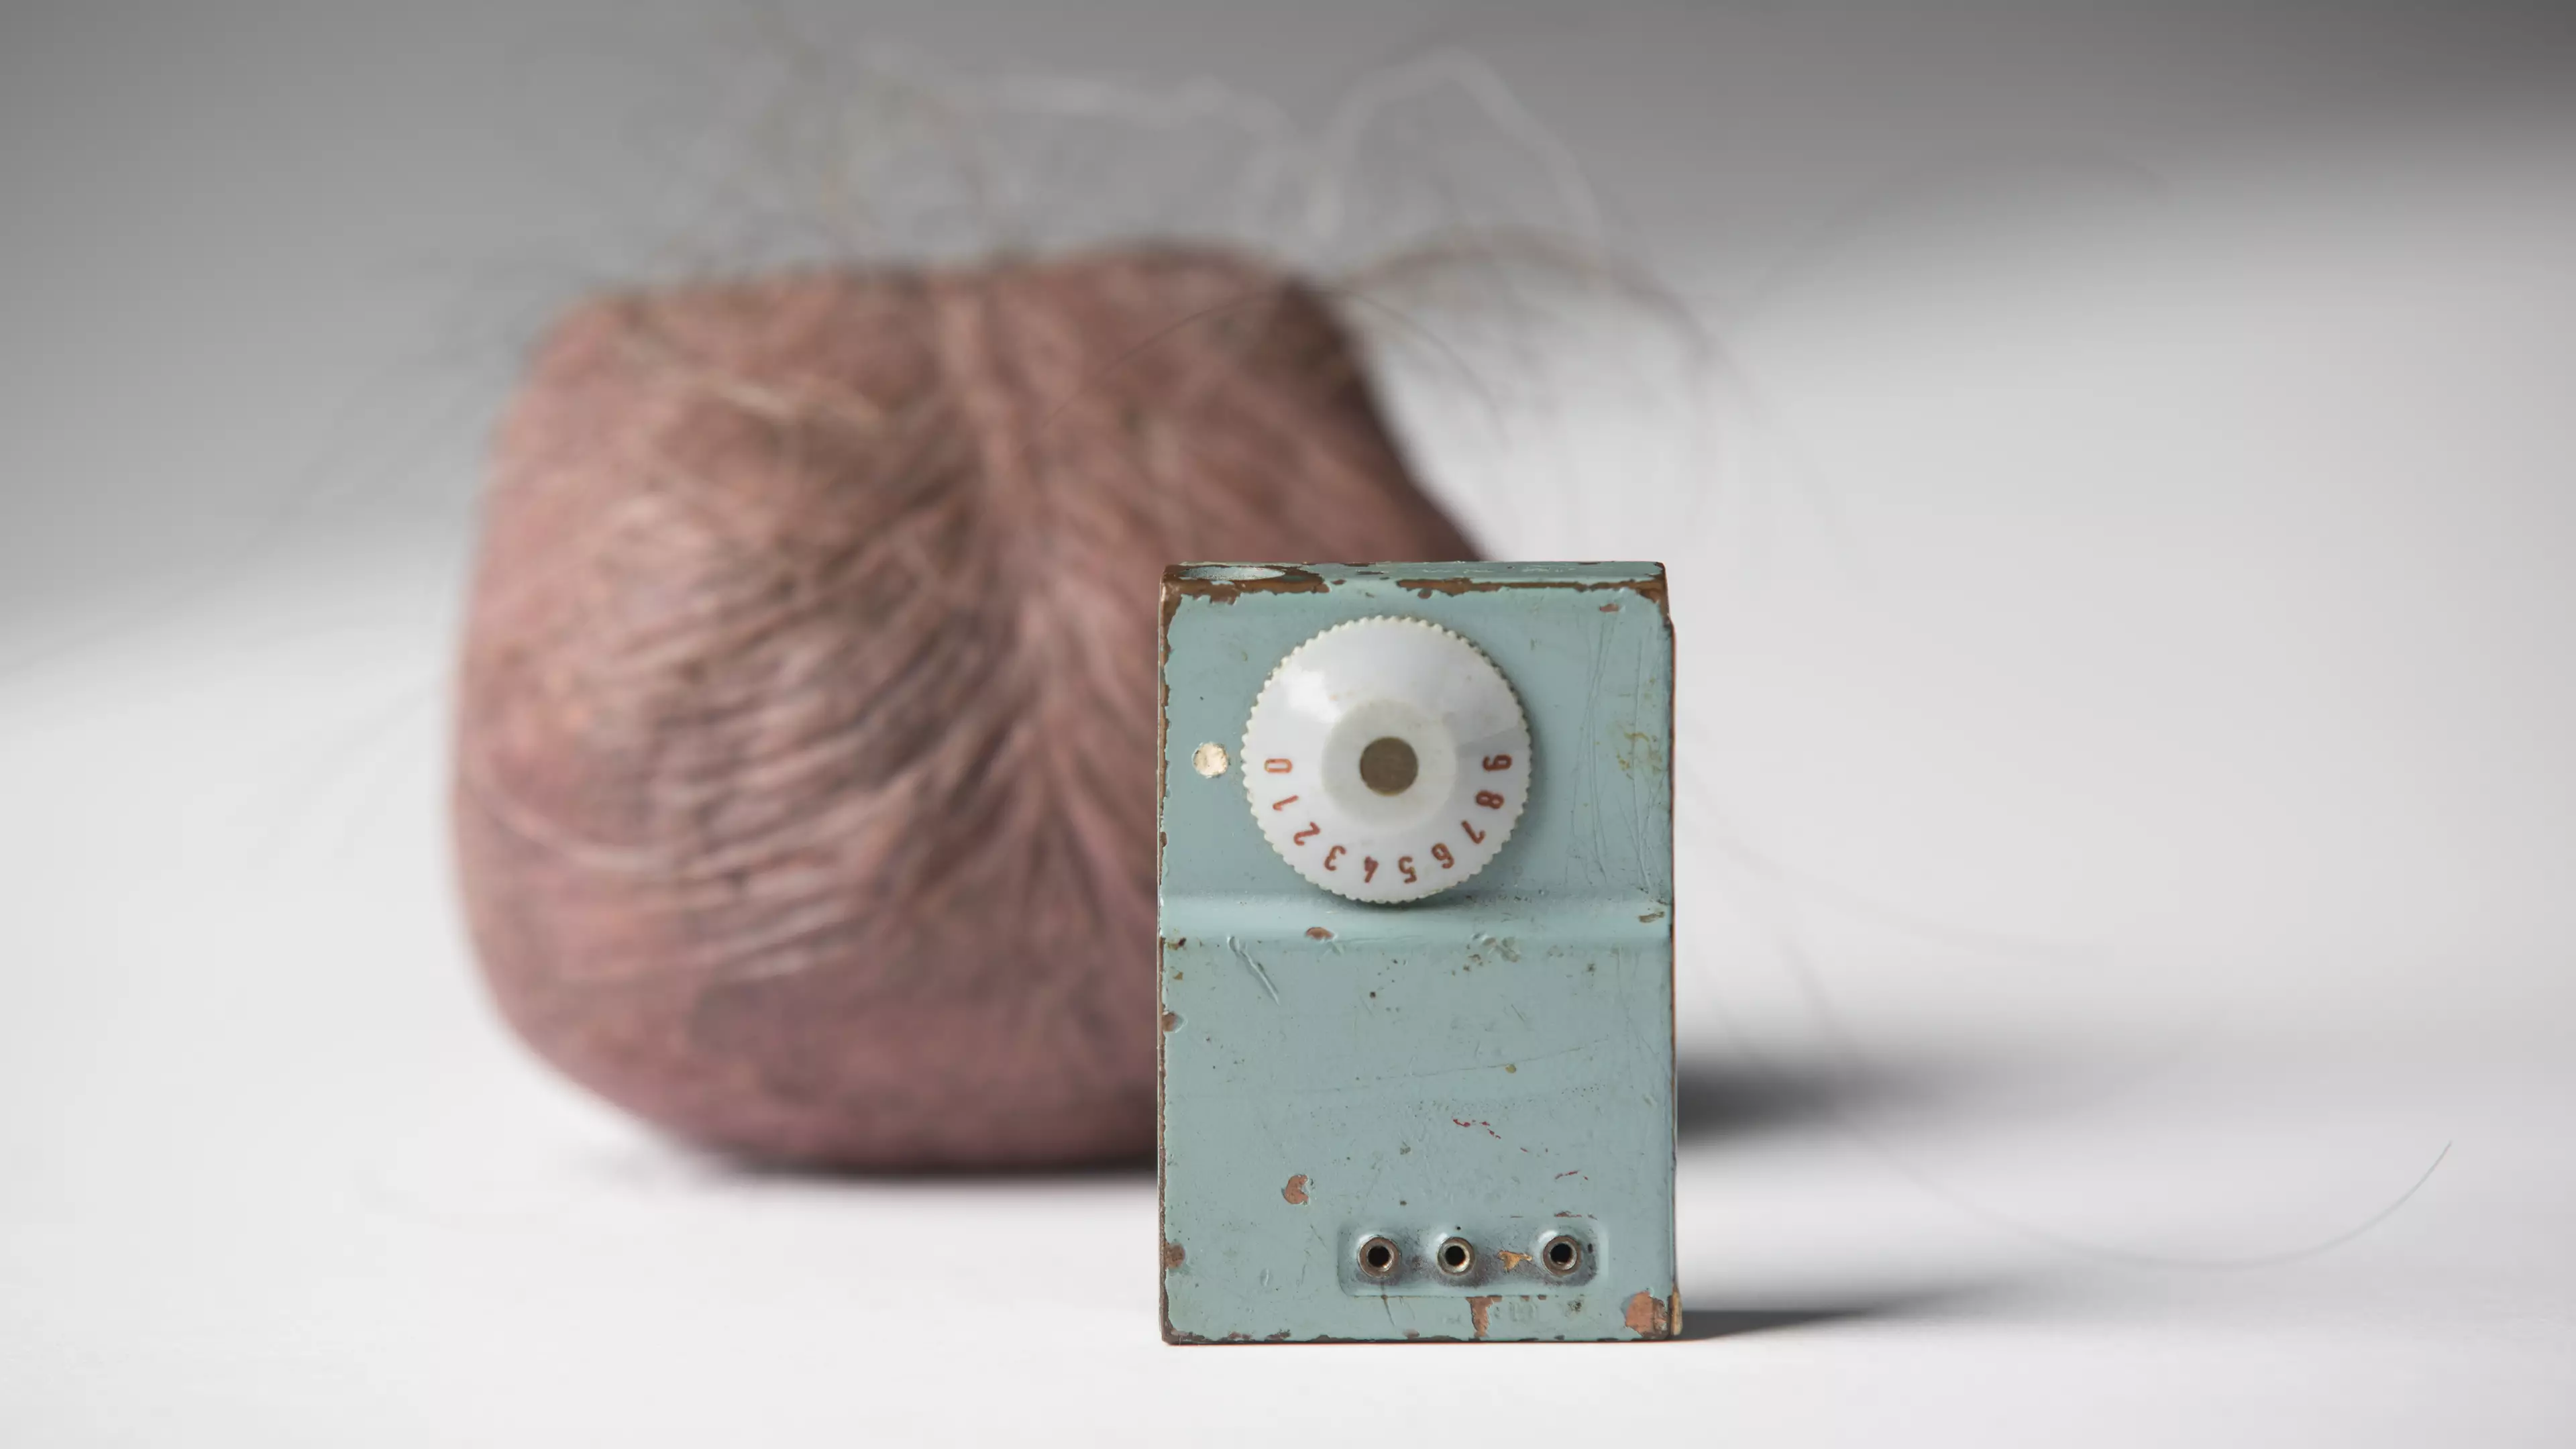 The CIA Designed A Fake Scrotum To Conceal An Escape Radio Inside 